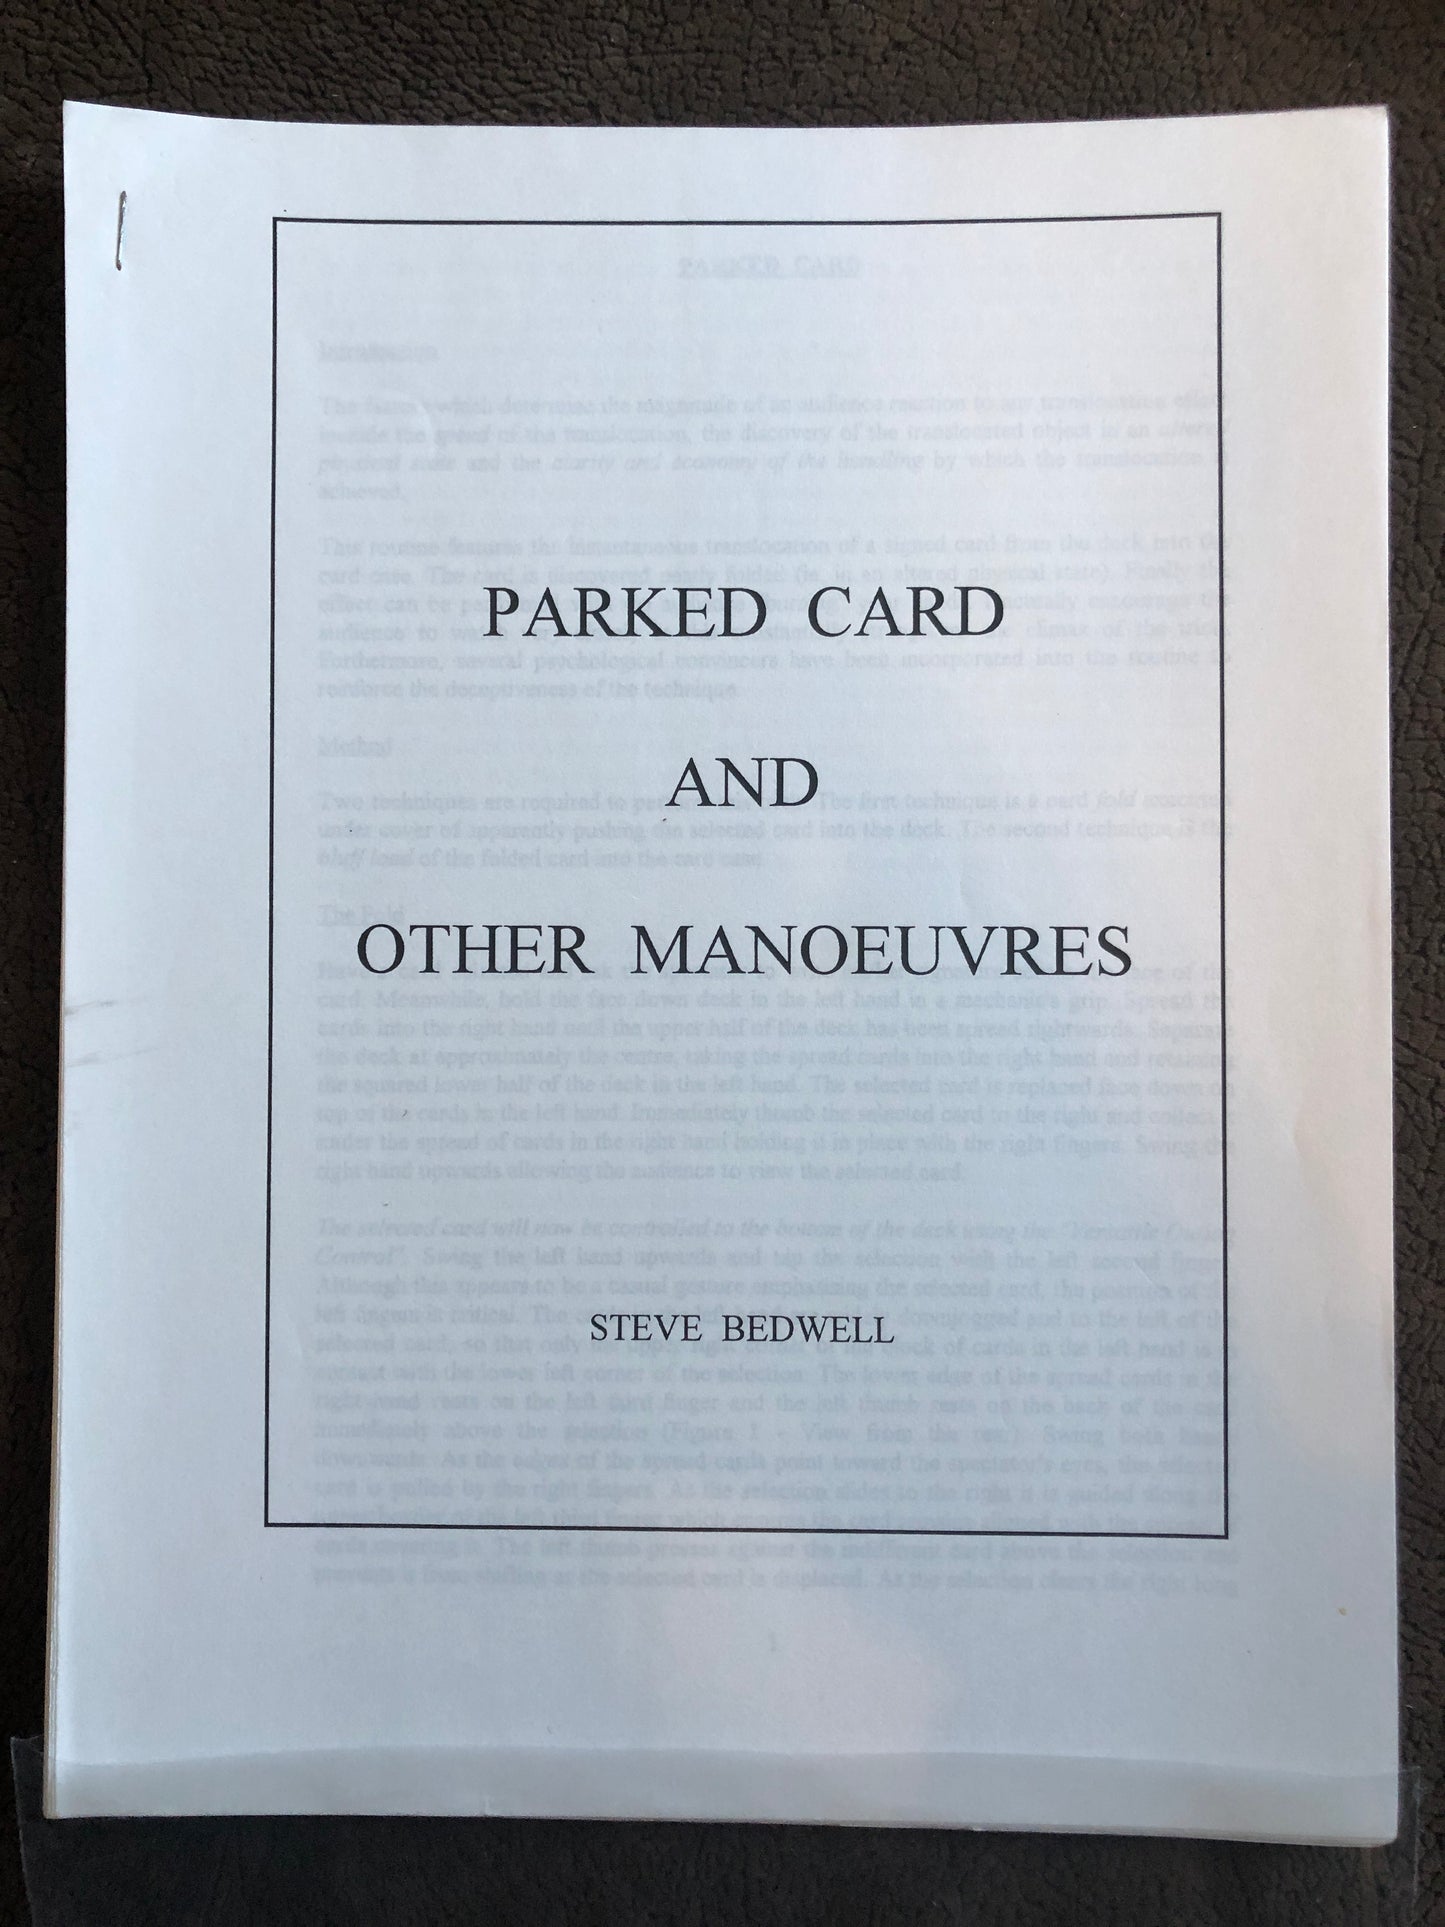 Parked Card And Other Maneuvers - Steve Bedwell